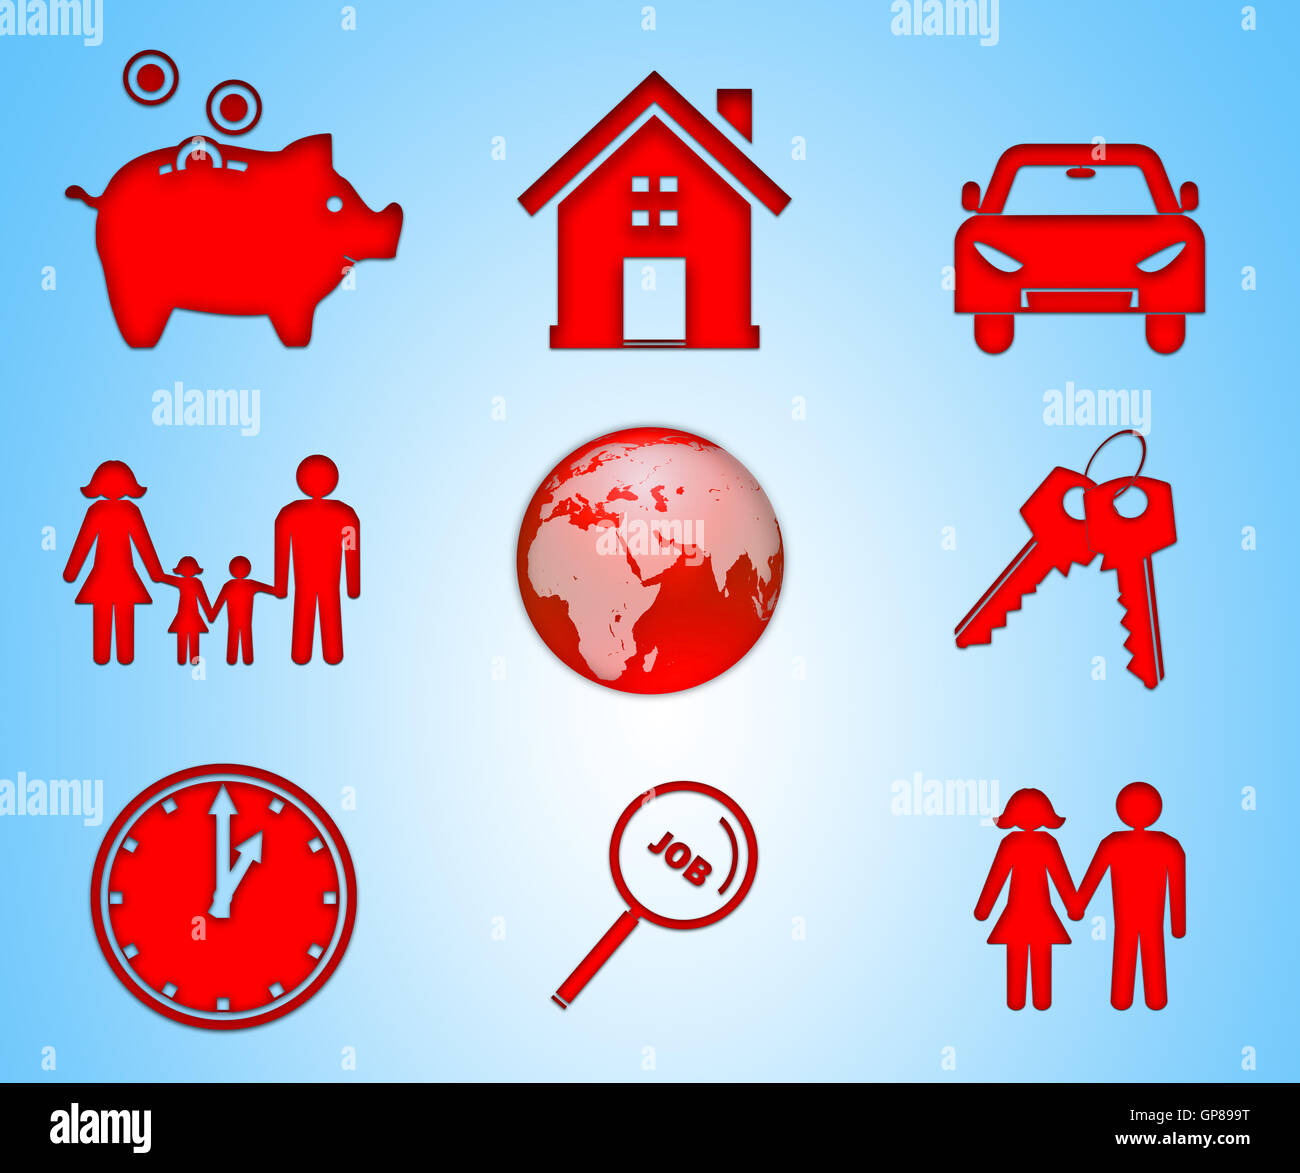 Icon set of modern life values. Family, time, home, money, property concepts Stock Photo